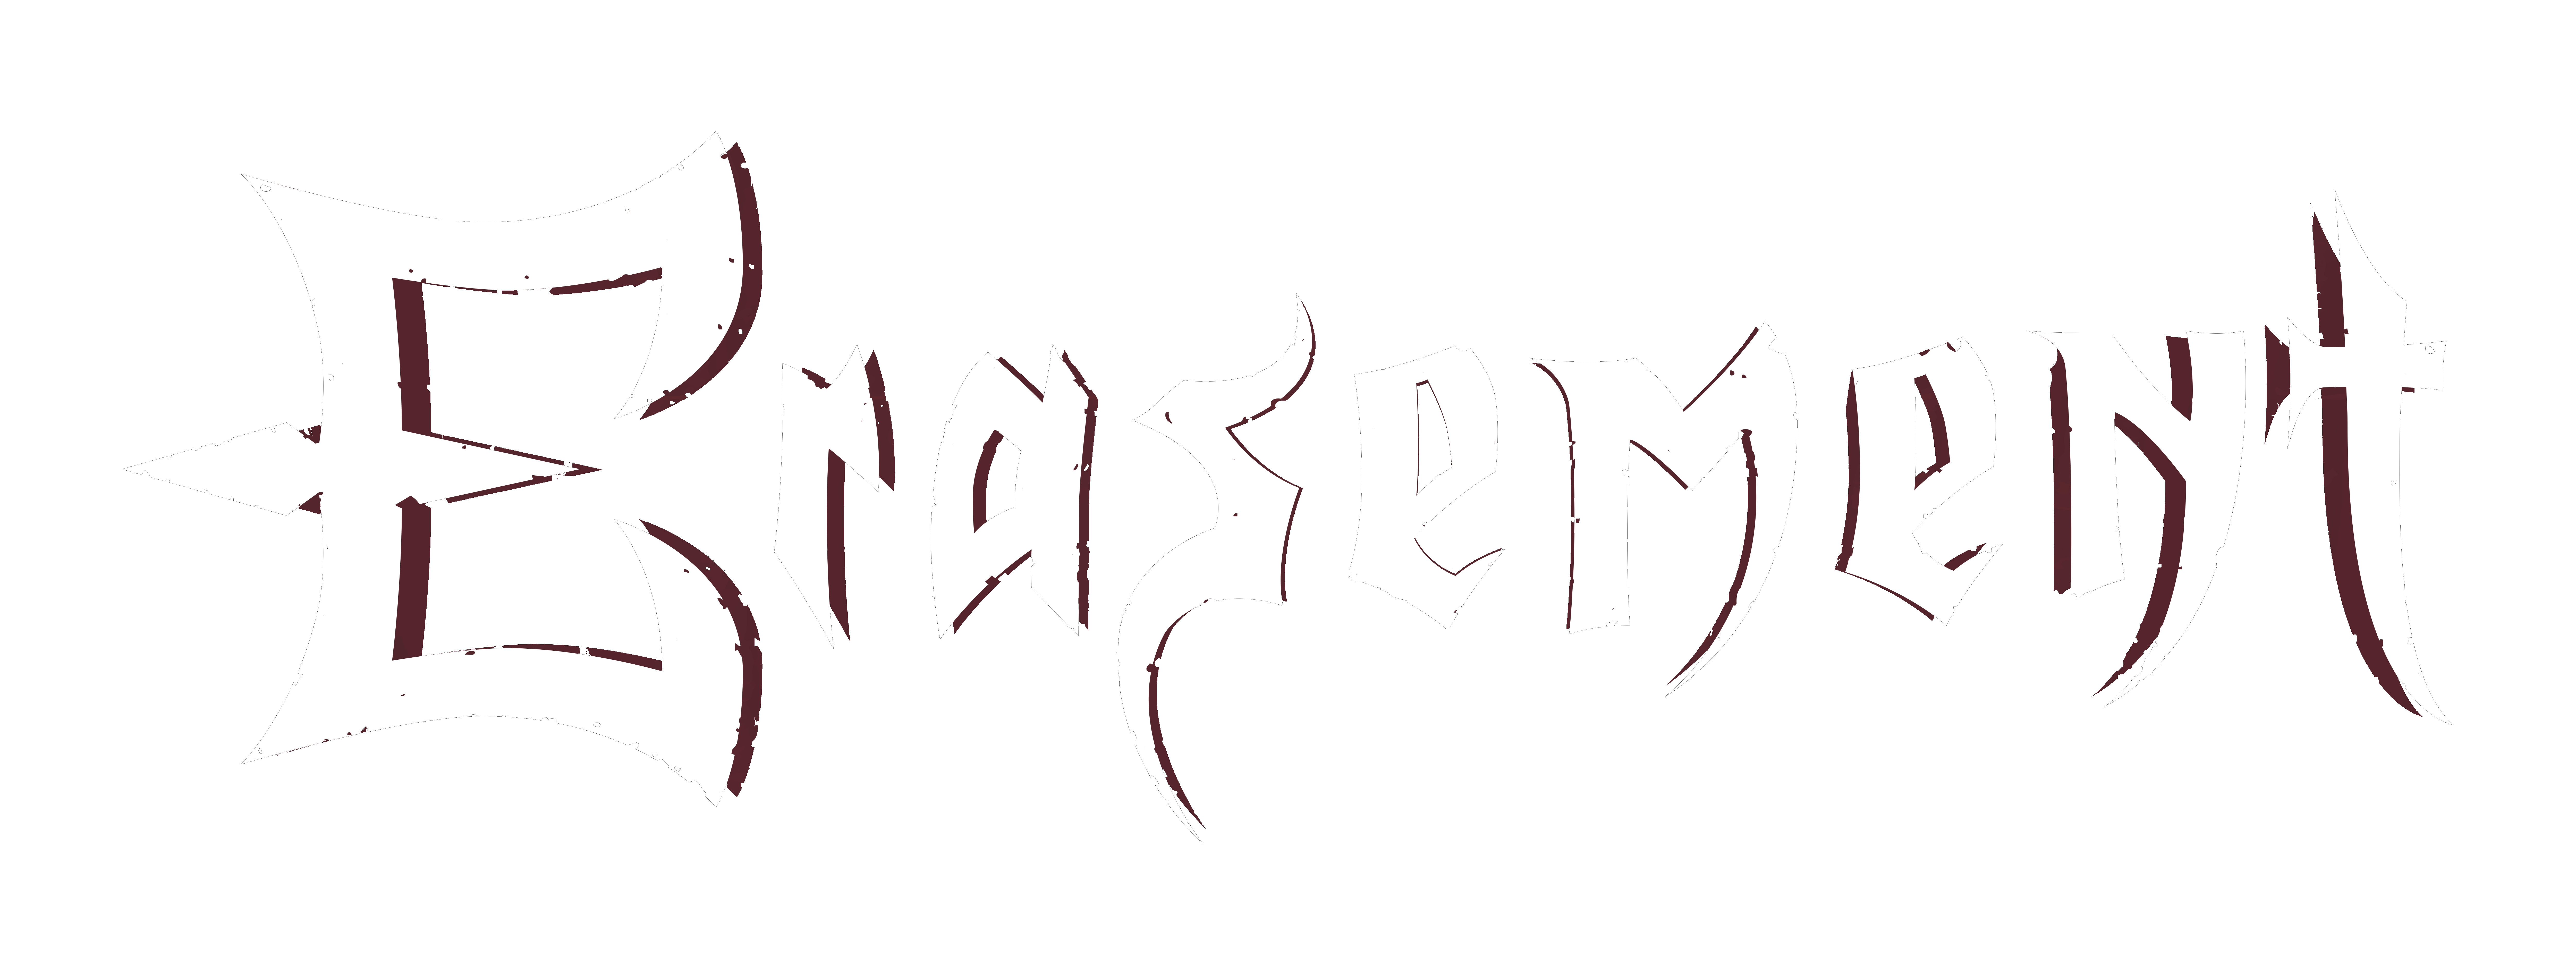 Lettering Erasement. The Logo is white with a dark red shadow.